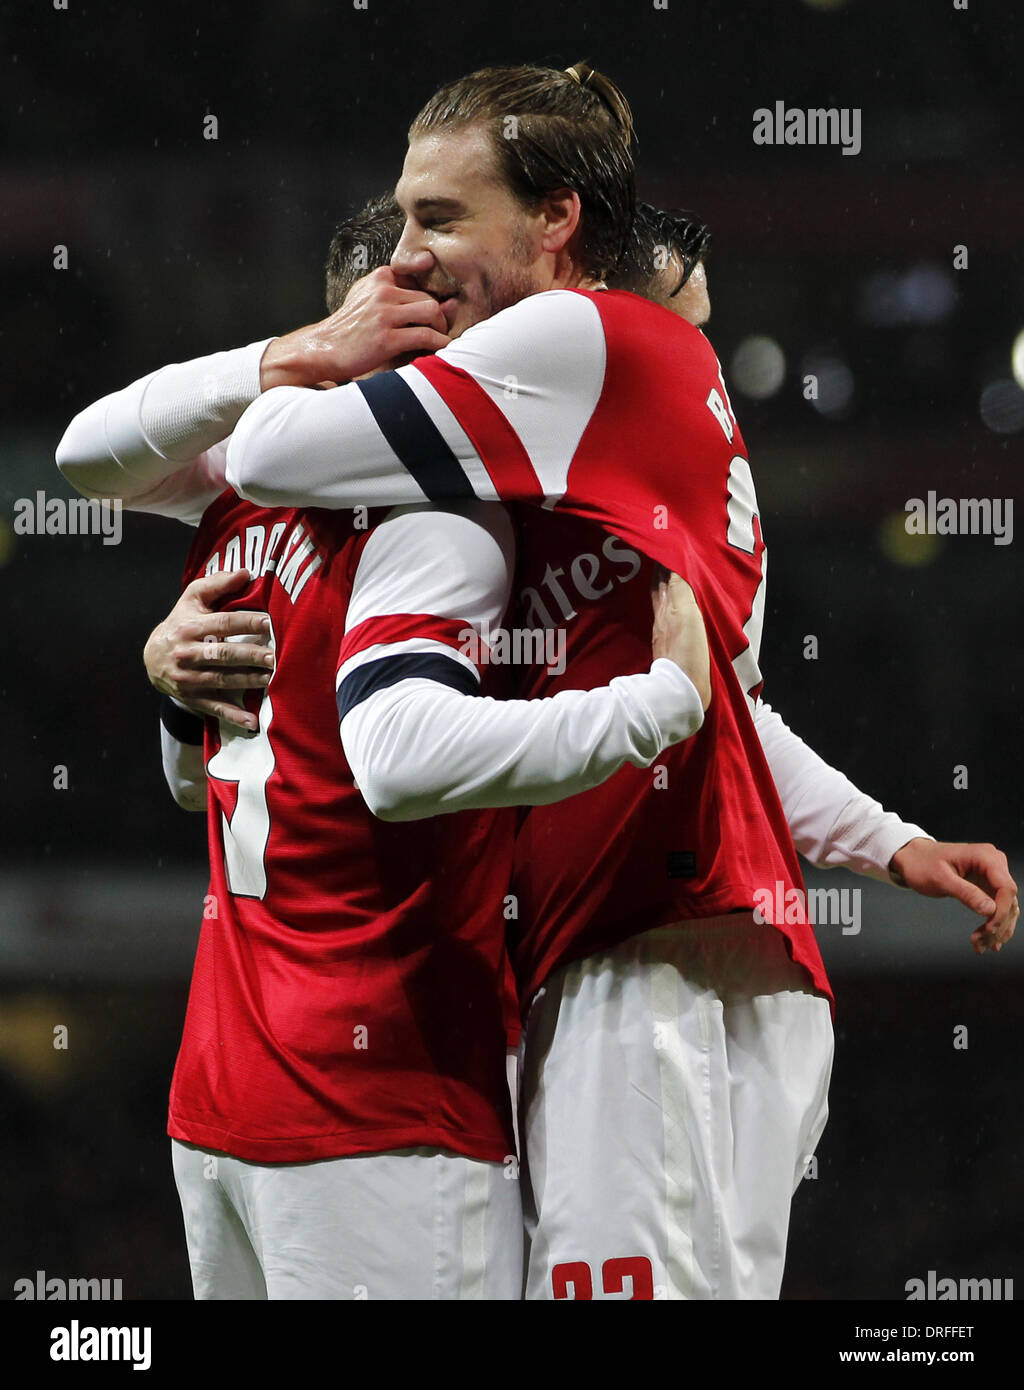 London, UK. 24th Jan, 2014. Nicklas Bendtner(R) of Arsenal congratulates Lukas Podolski scoring second goal during FA Cup Fourth Round match between Arsenal and Coventry City at Emirates Stadium in London, Britain on Jan. 24, 2014. Arsenal won 4-0. Credit:  Wang Lili/Xinhua/Alamy Live News Stock Photo